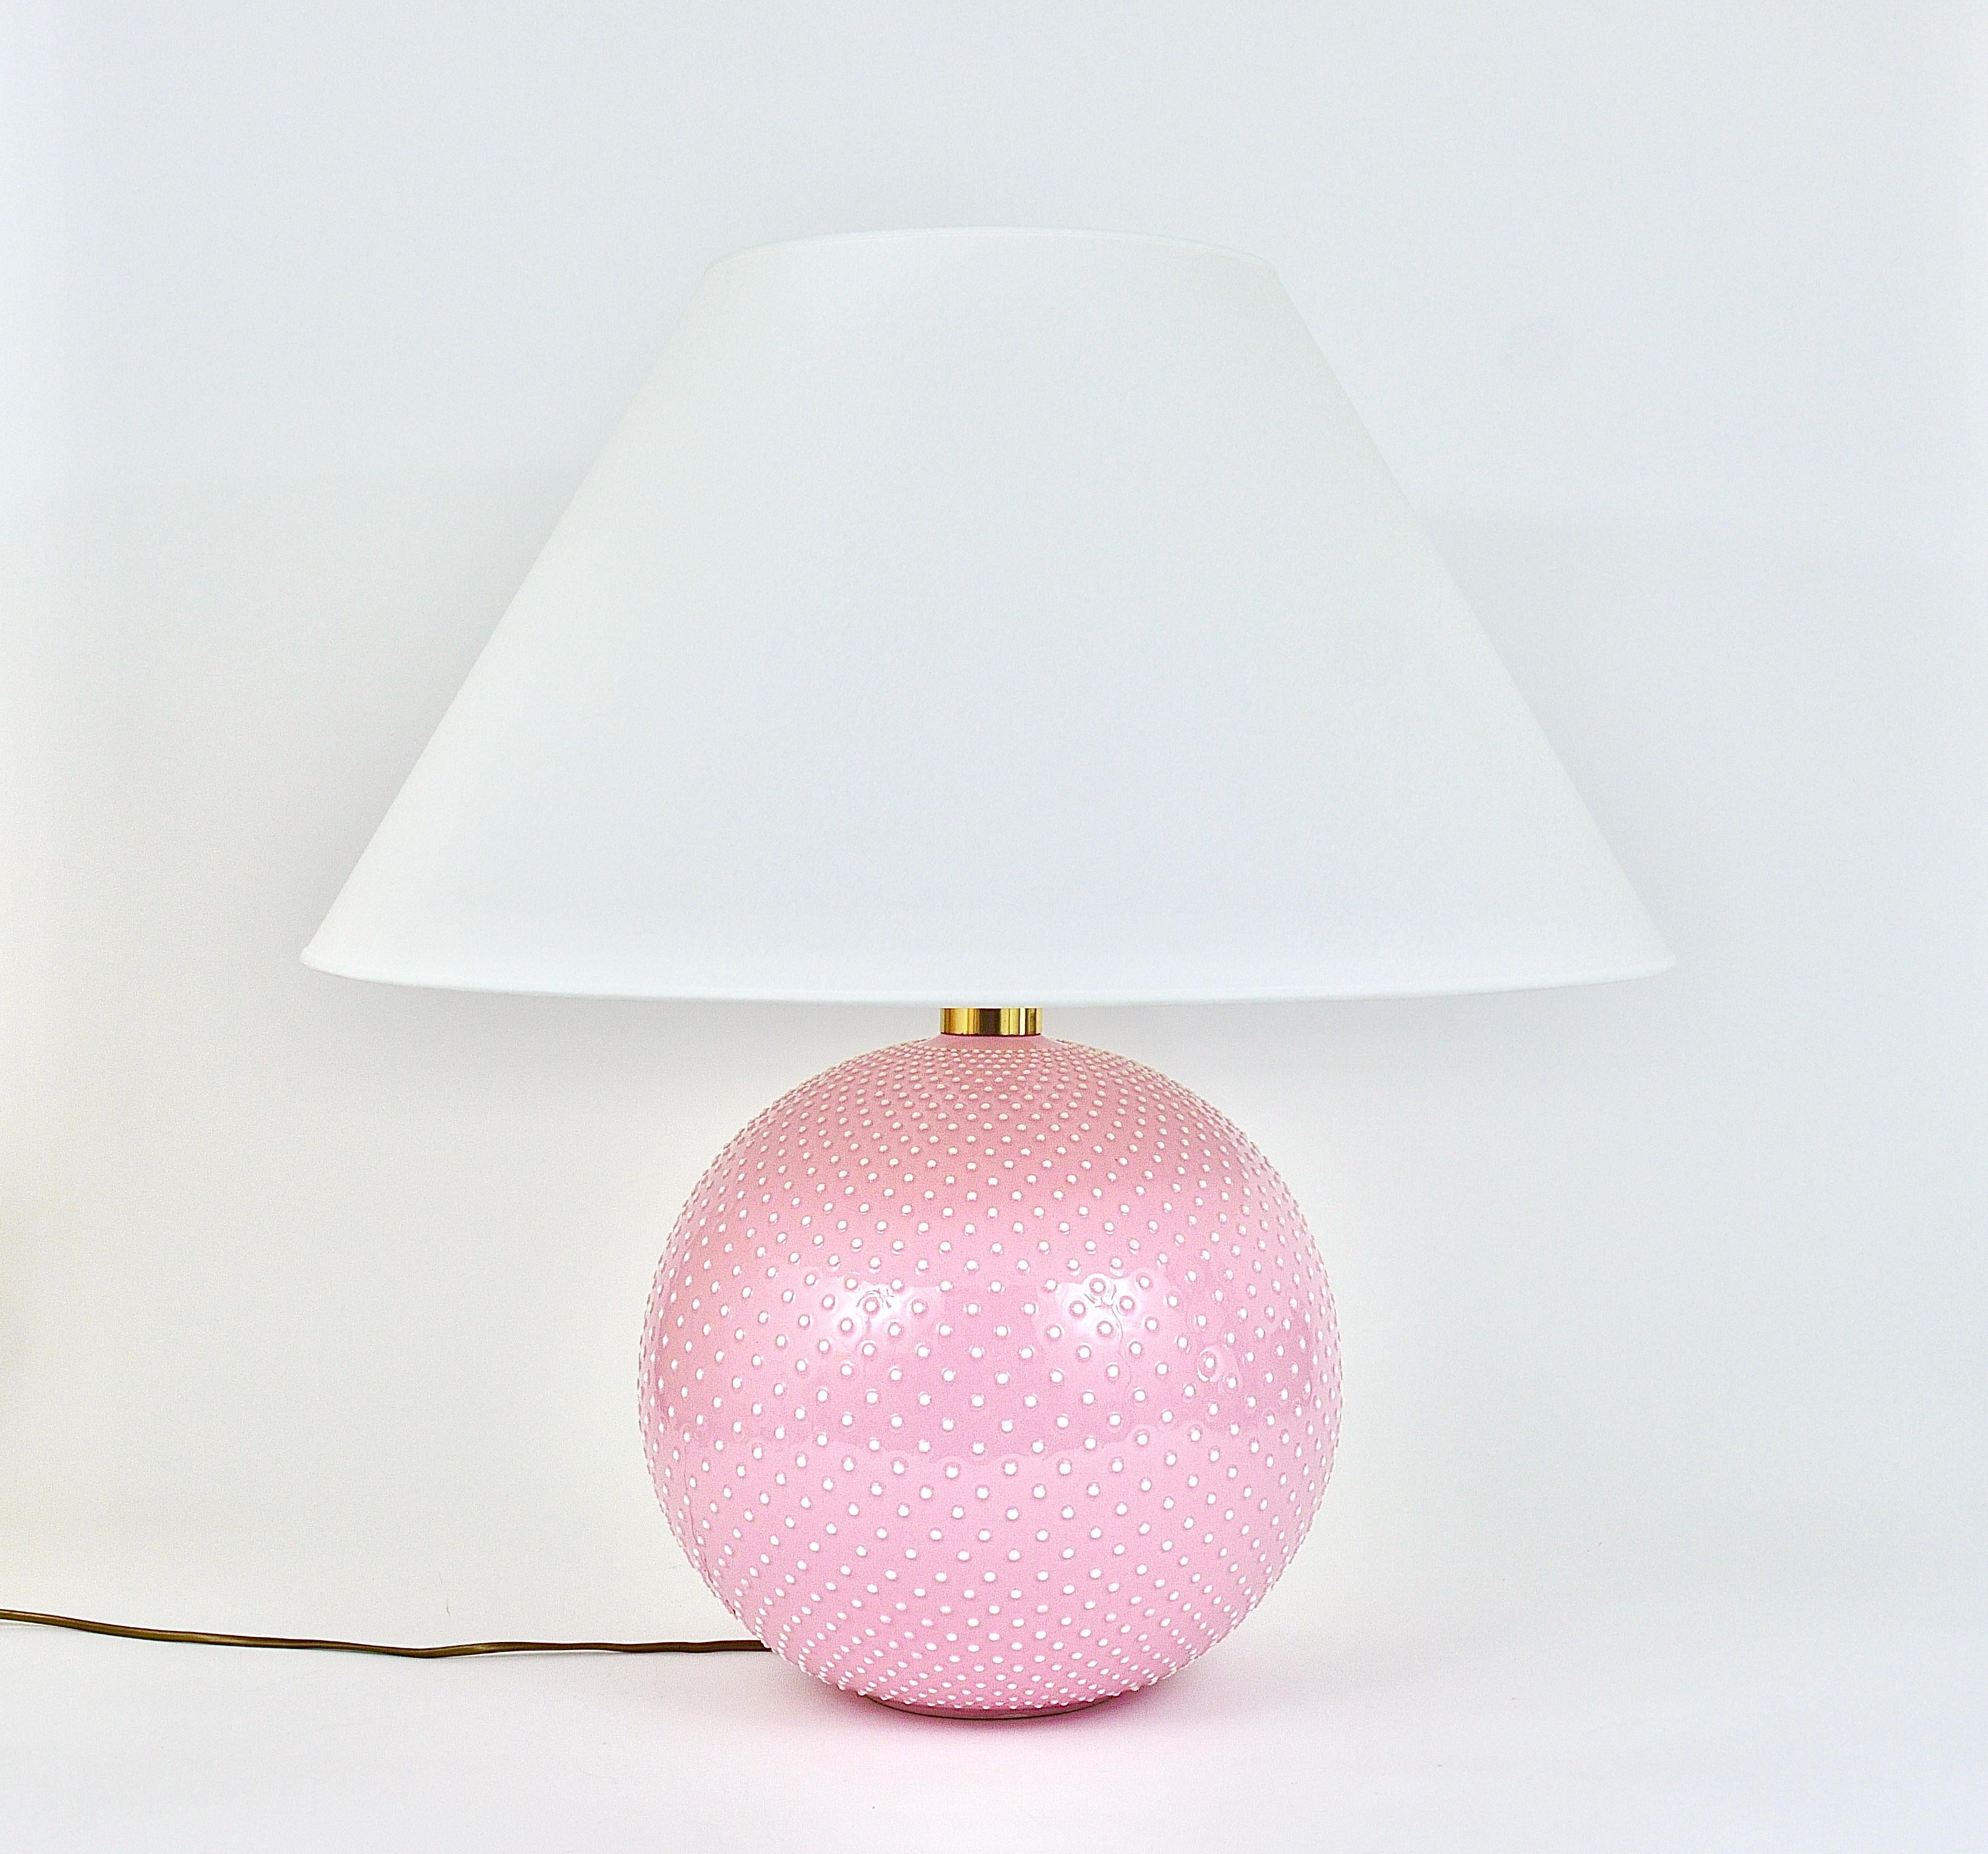 A lovely and large spherical Midcentury table or side lamp from the 1970s, executed by Studio PAF Milano, Italy. Its base is made of shiny glazed ceramic and brass and it has an amazing textured polka dot relief surface in pastel pink and white. The